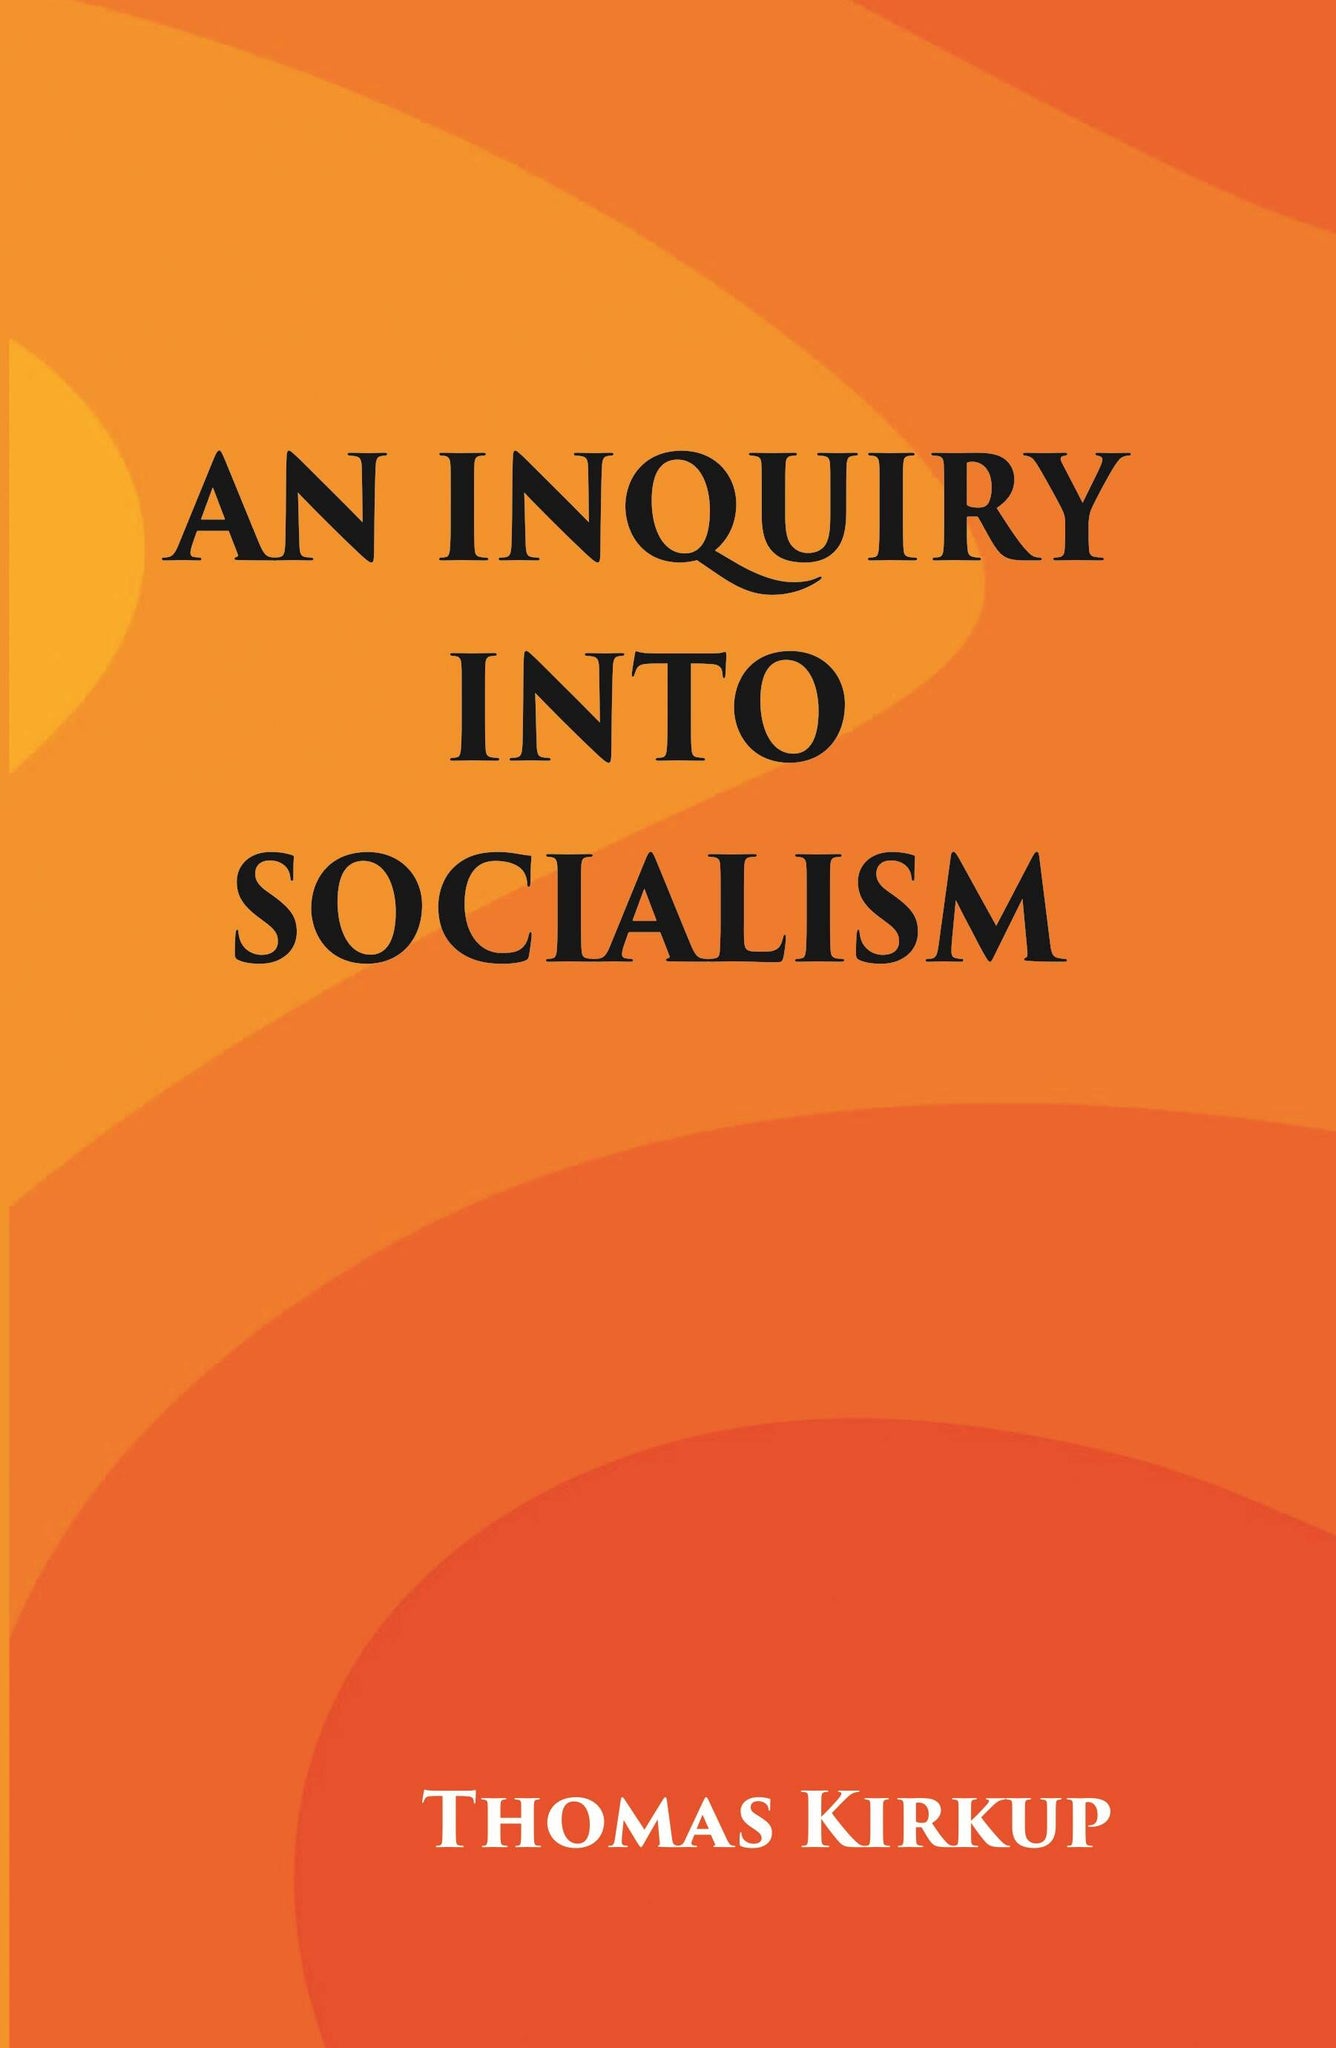 An Inquiry into Socialism